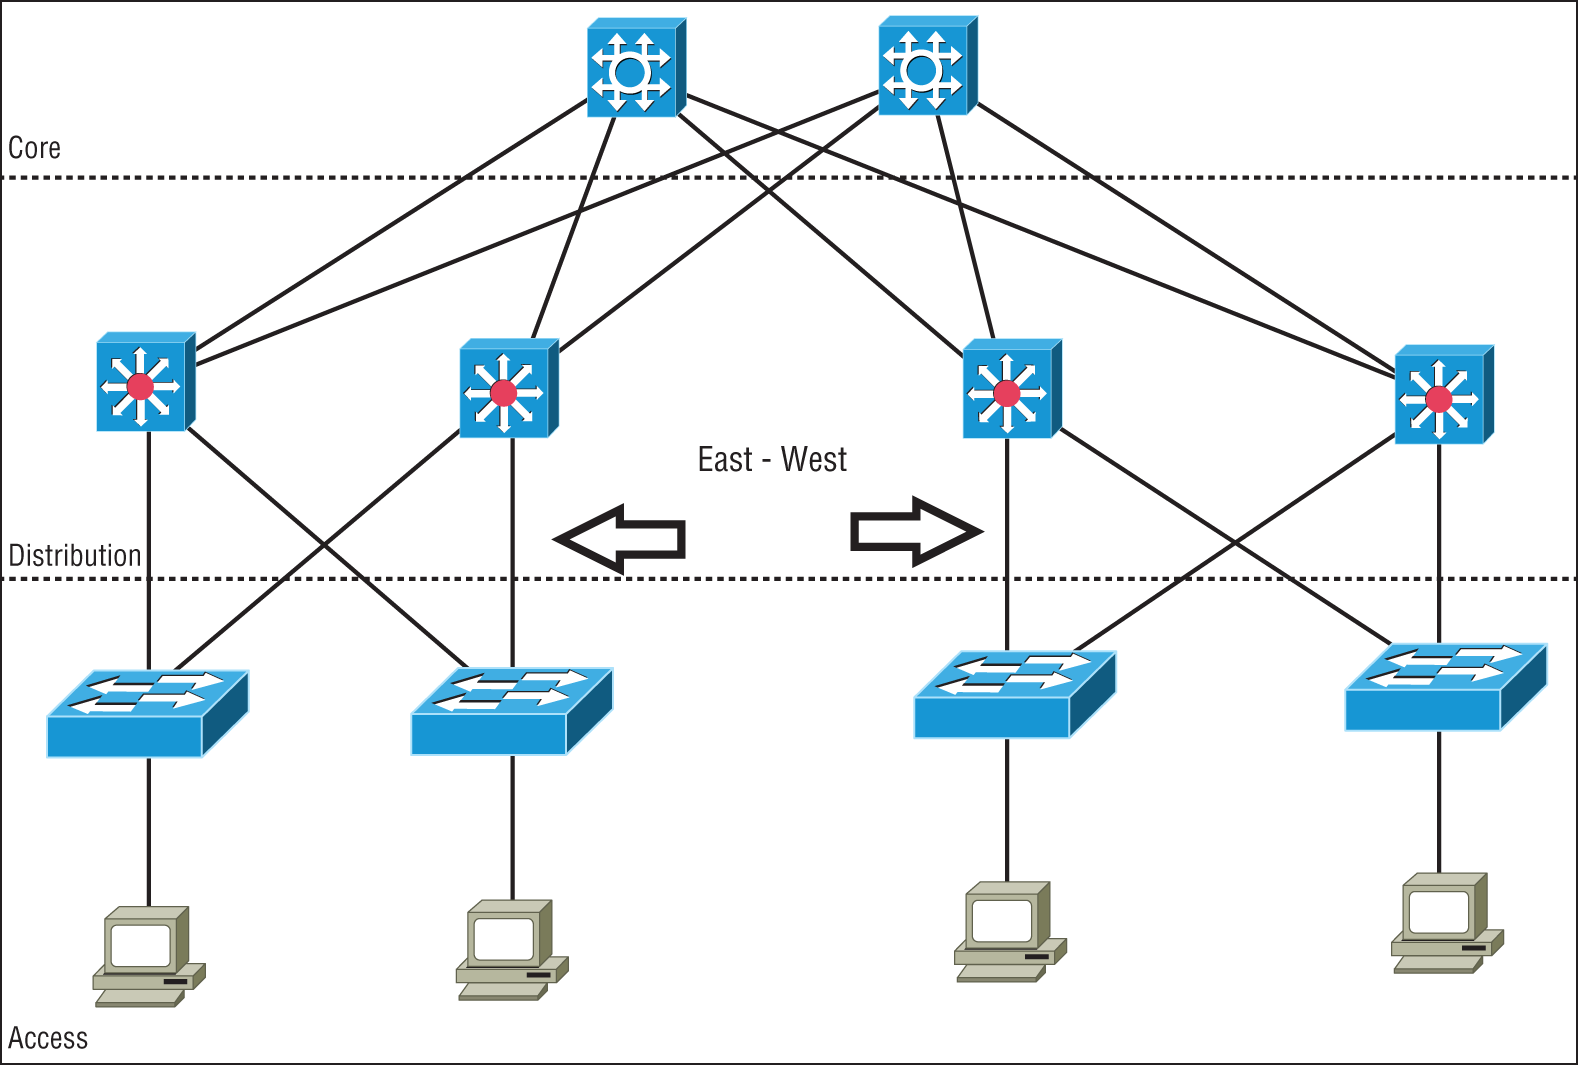 Schematic illustration of East-West data flow in a data center